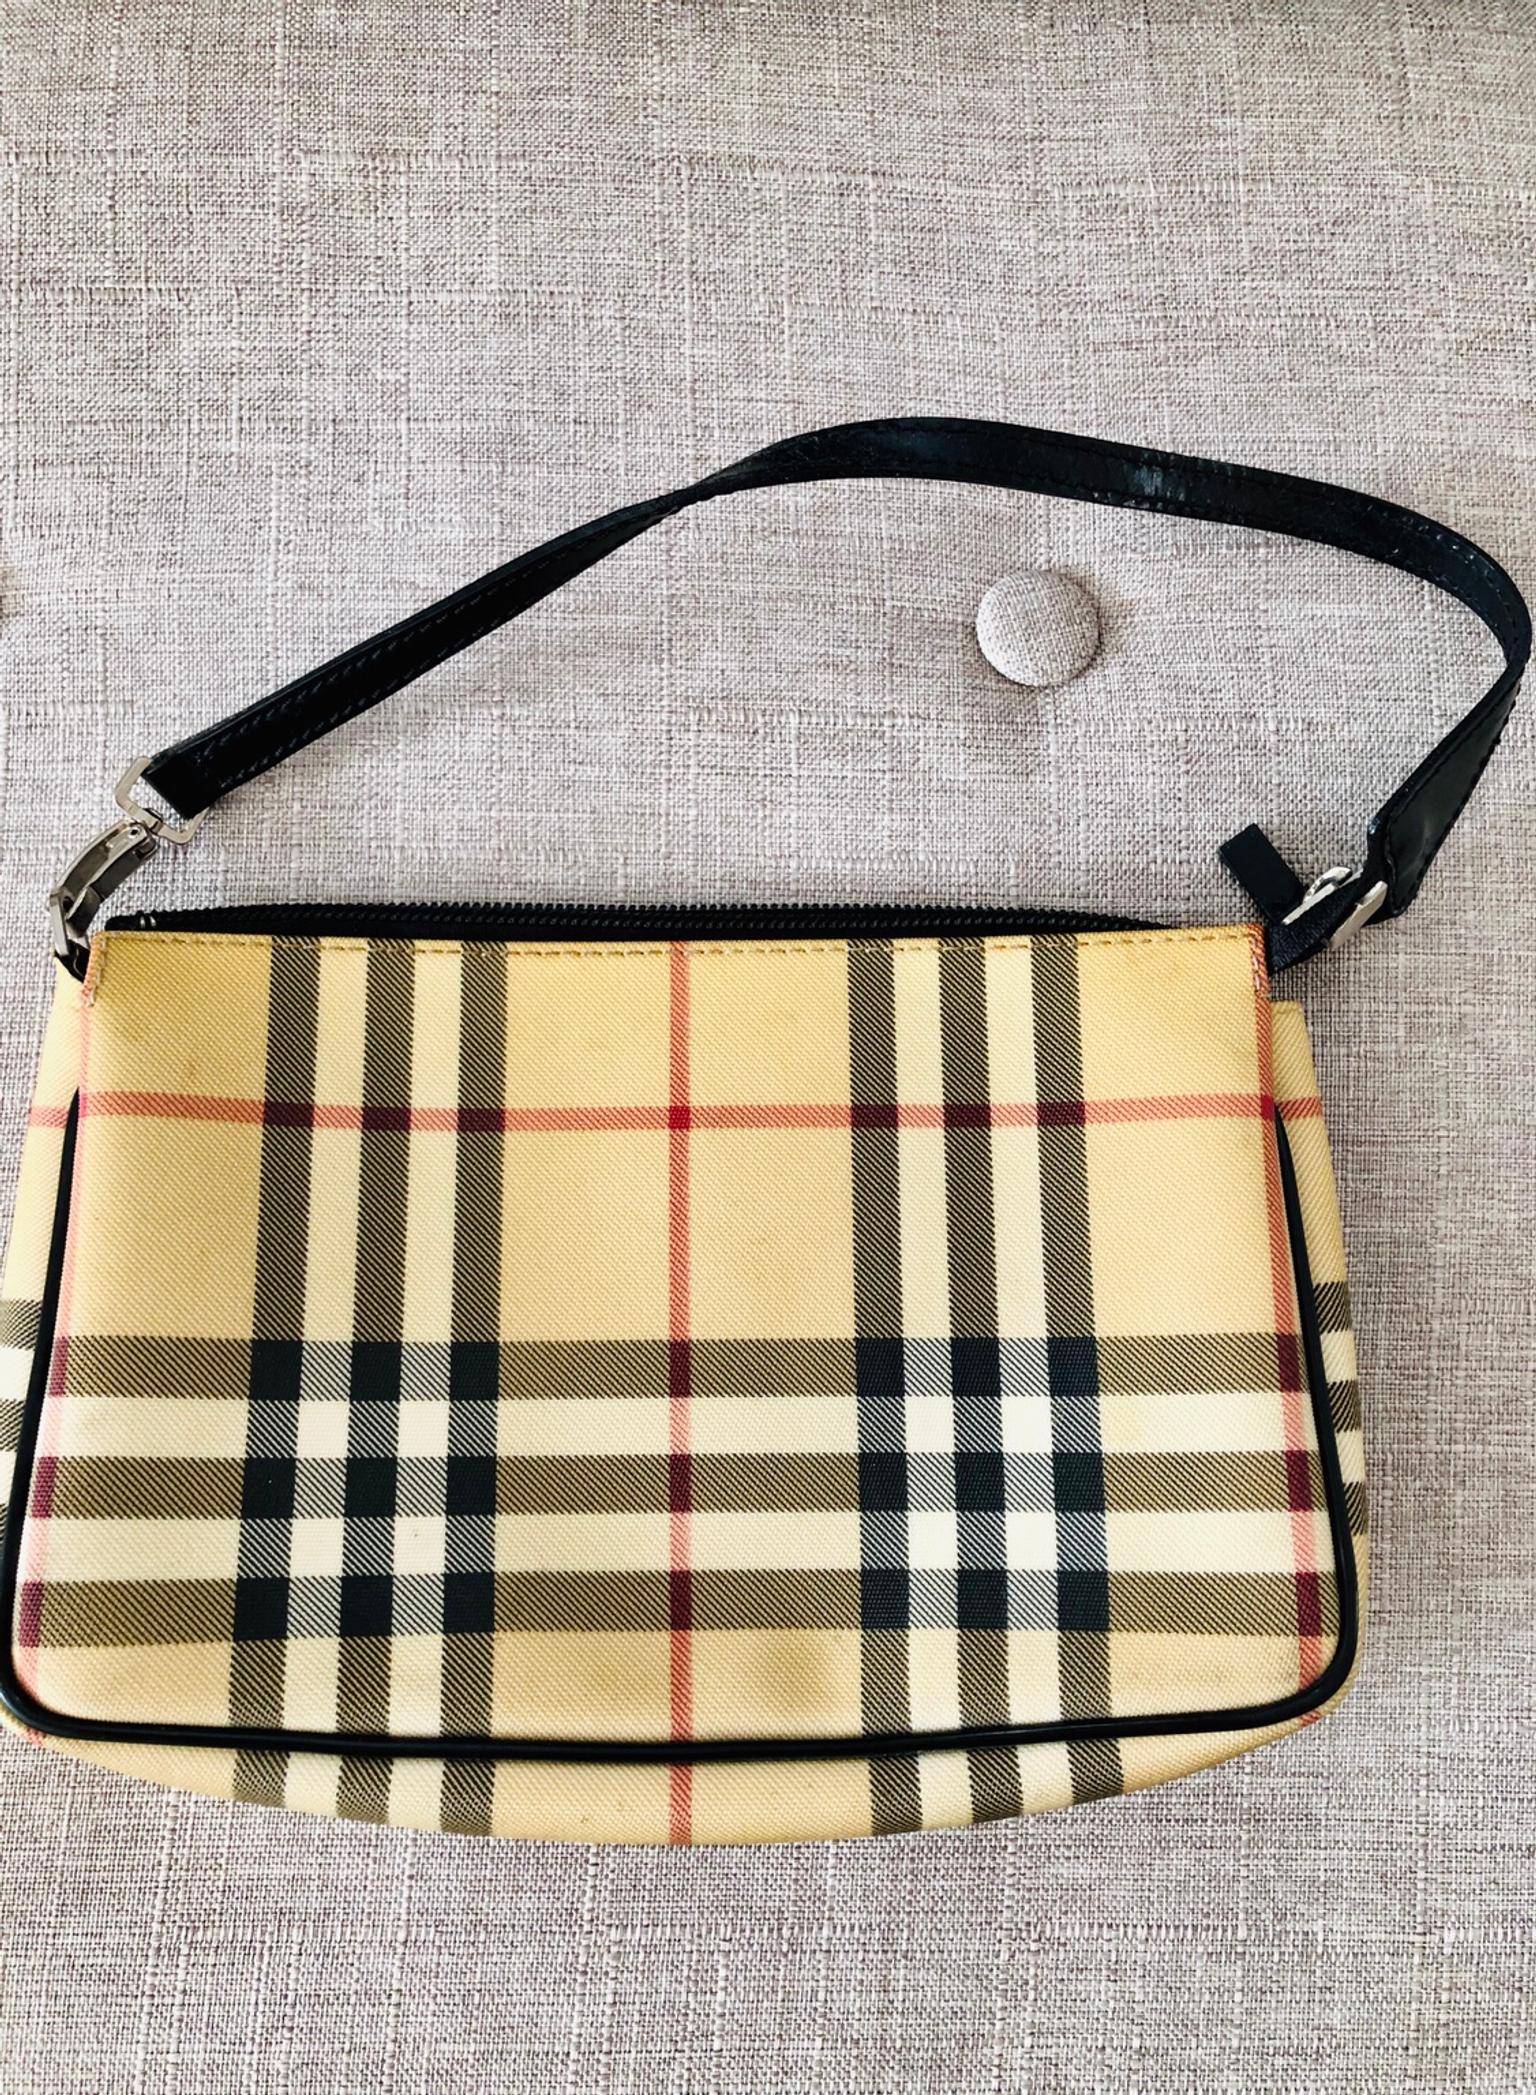 Vintage Burberry small bag in Newell 